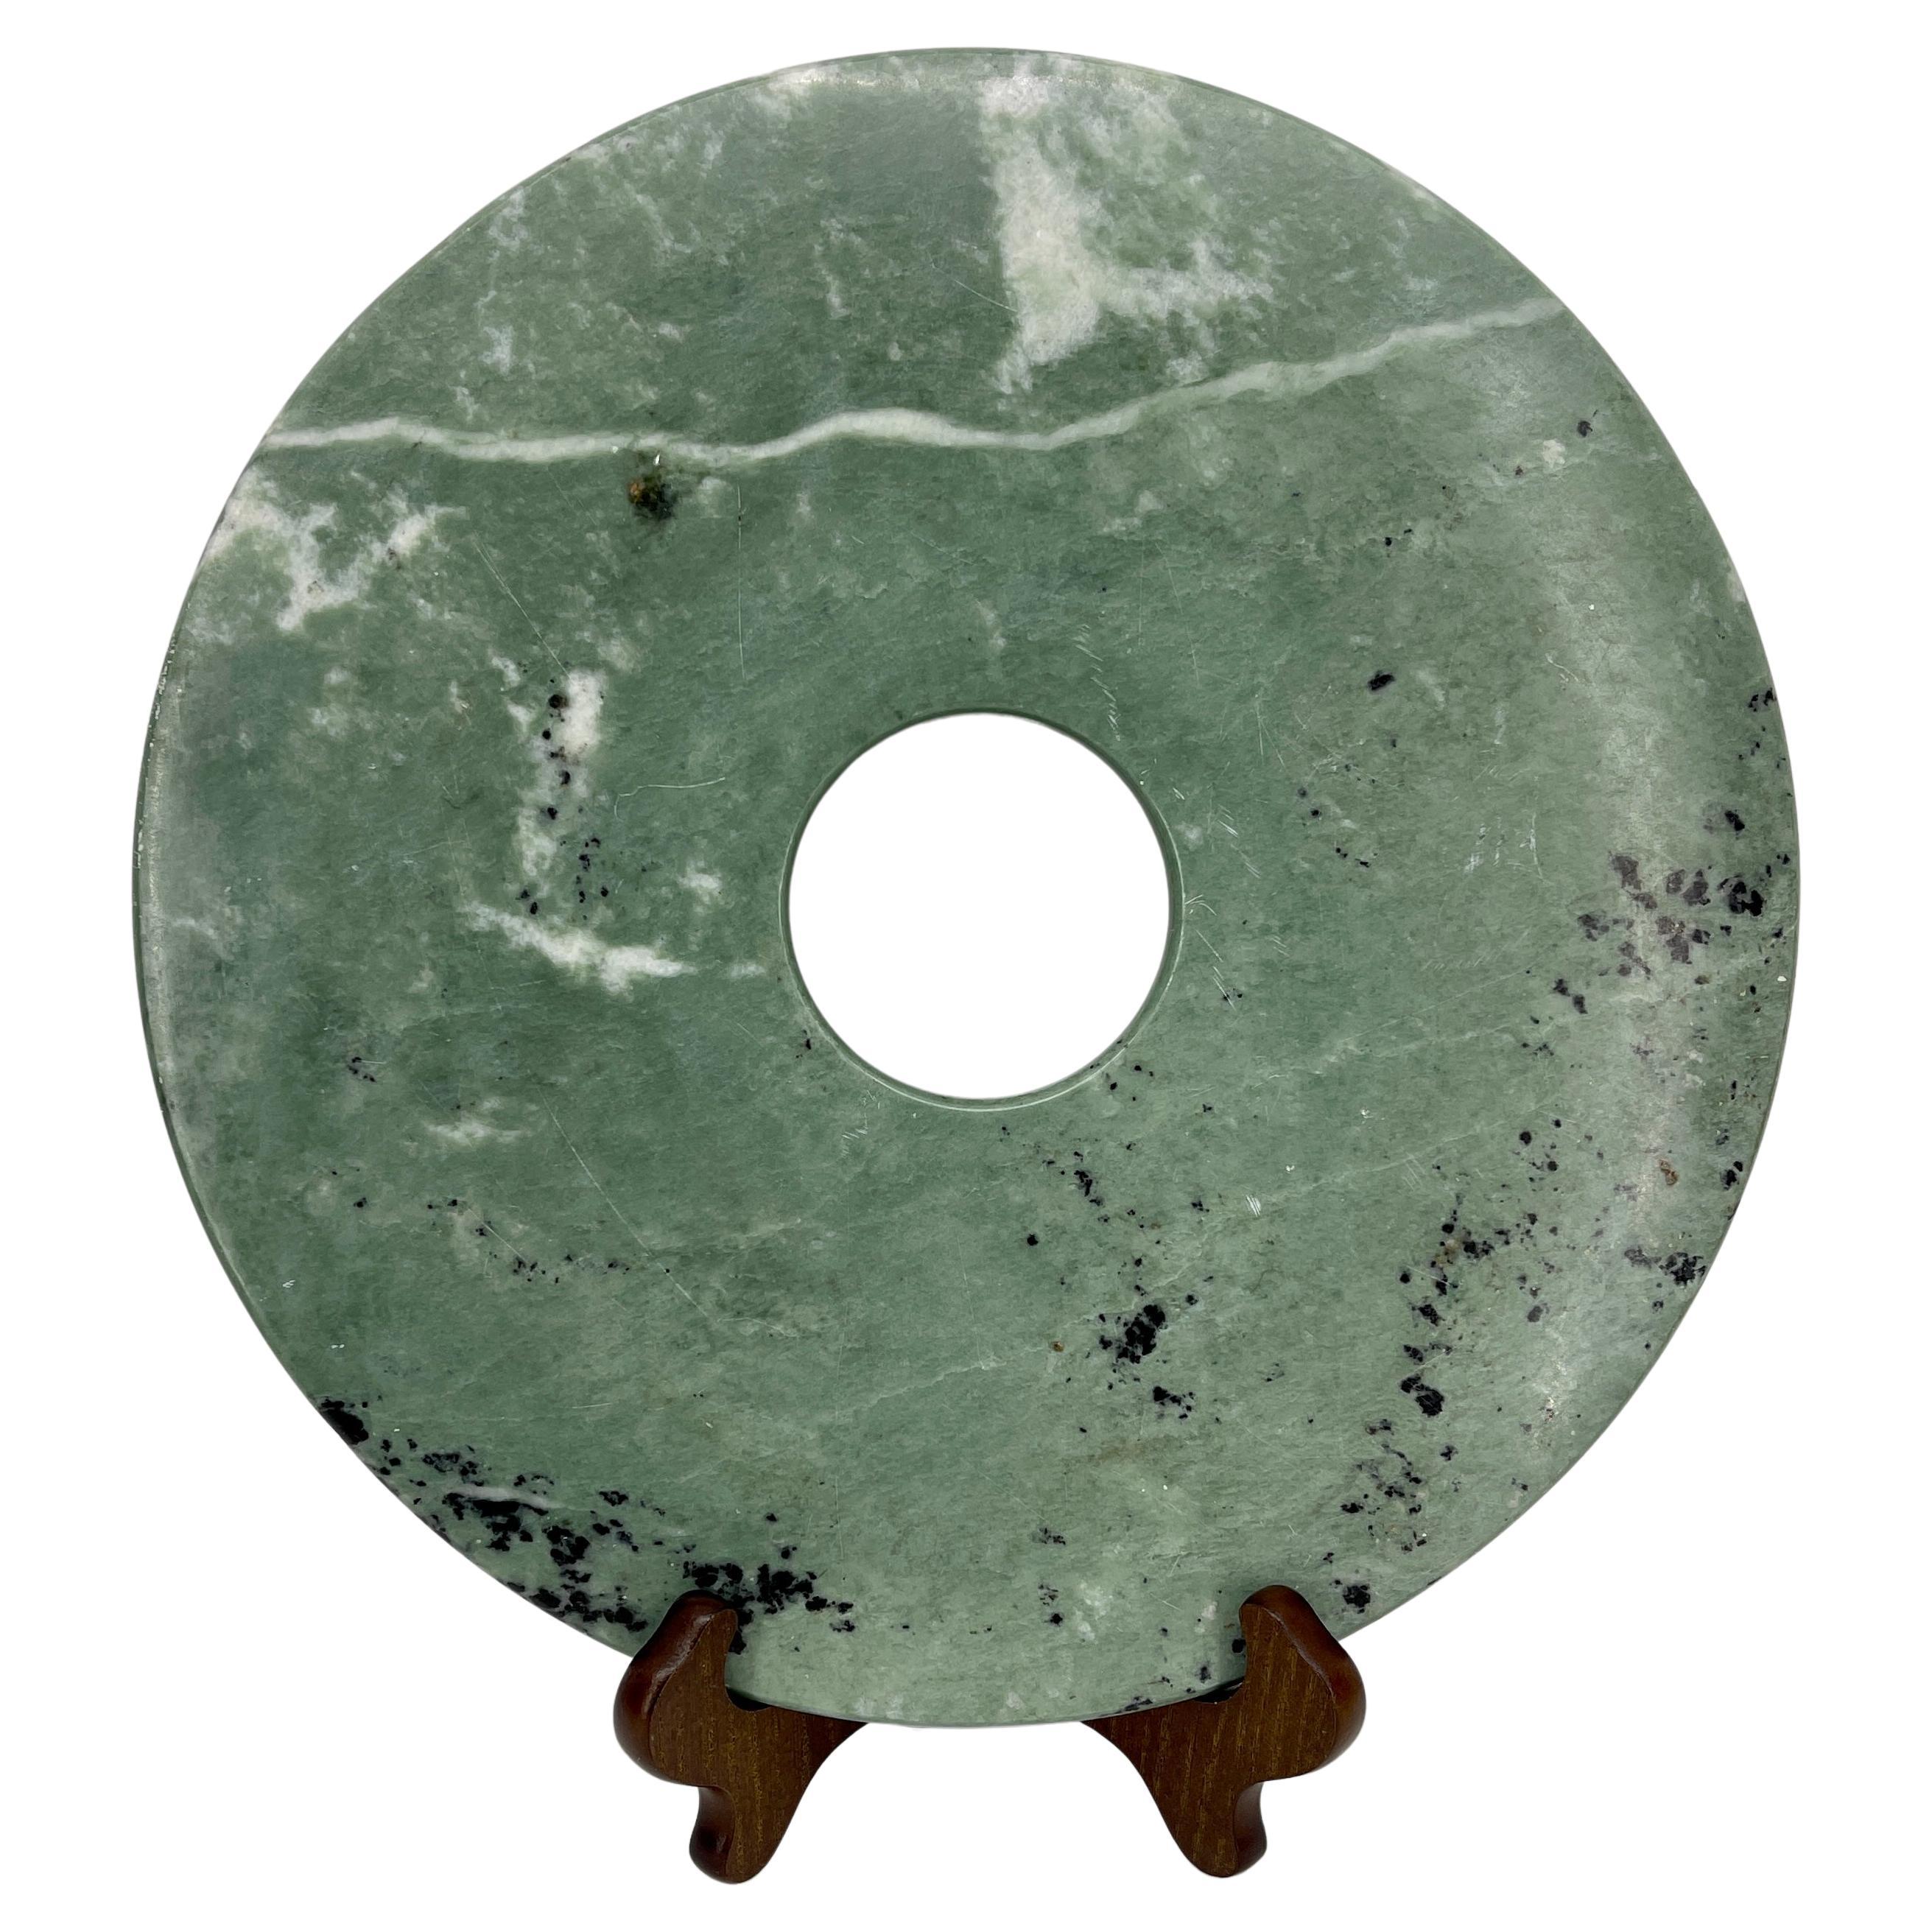 Green Chinese marble money stone table top statue, Mid-Century Modern.
Large green marble with beautiful dark veins is reminiscent of Chinese jade money stone. The rich green stone is polished with center hole having polished edges as well. As a